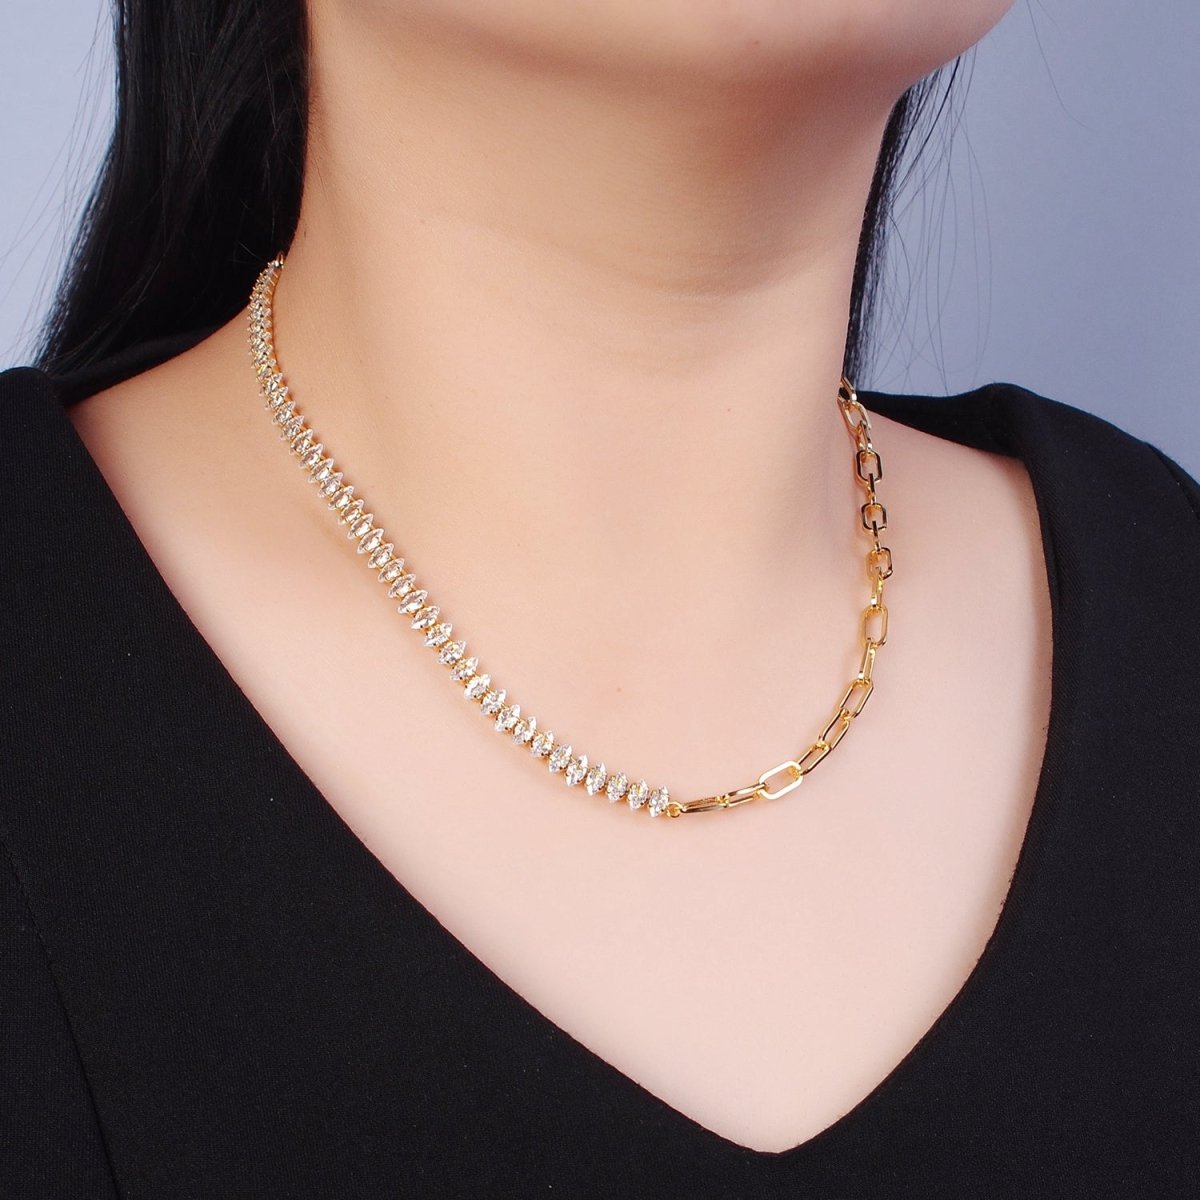 Gold Filled 16 Inch Half Clear CZ Marquise Tennis Chain, Half Paperclip Chain Necklace in Gold & Silver Color | WA-957 WA-958 Clearance Pricing - DLUXCA